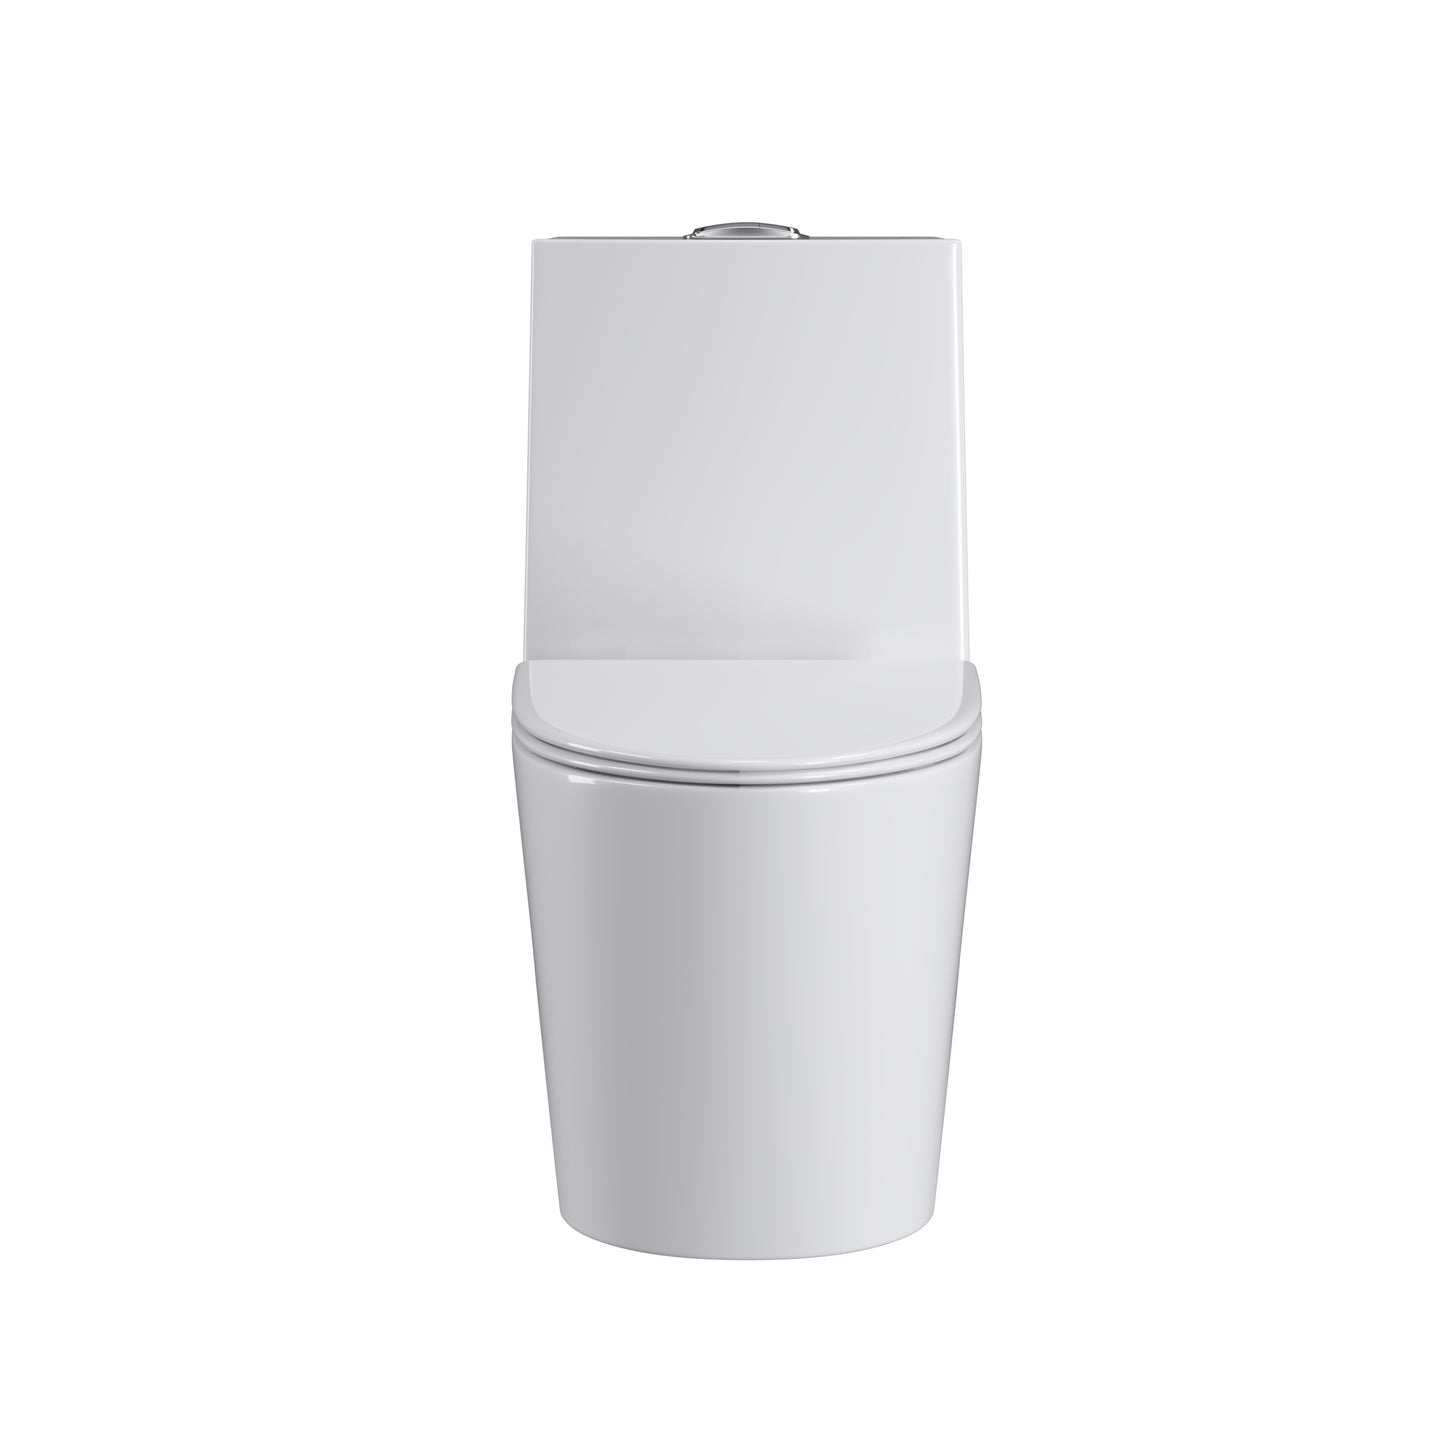 Dual Flush Elongated Standard One Piece Toilet with Comfortable Seat Height, Soft Close Seat Cover, High-Efficiency Supply, and White Finish Toilet Bowl (White Toilet)